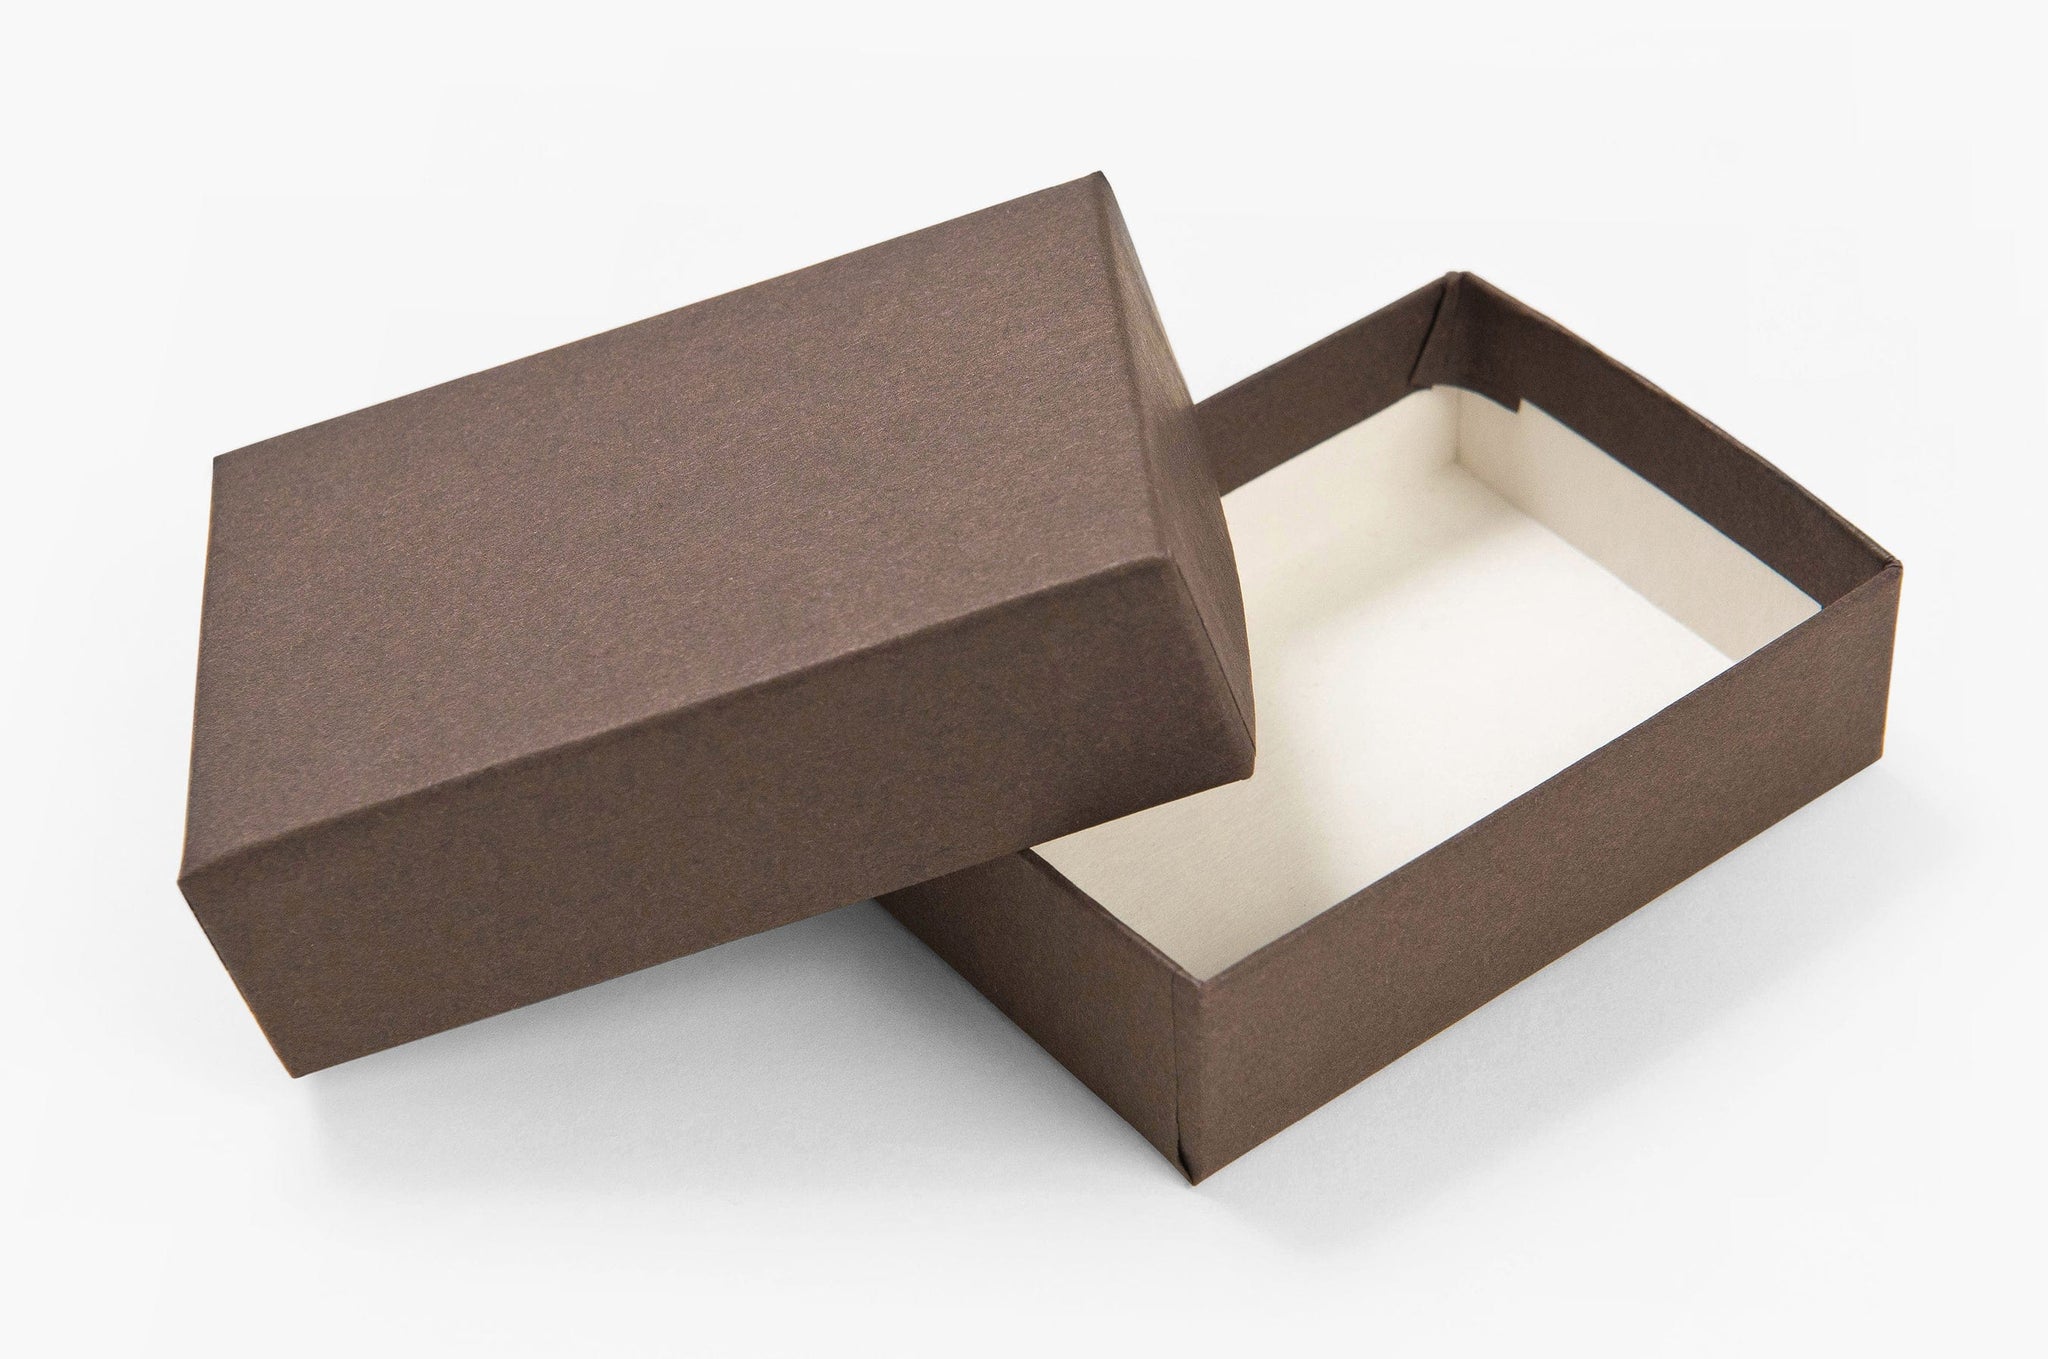 A single Classic Wallet Boxes on a white background.